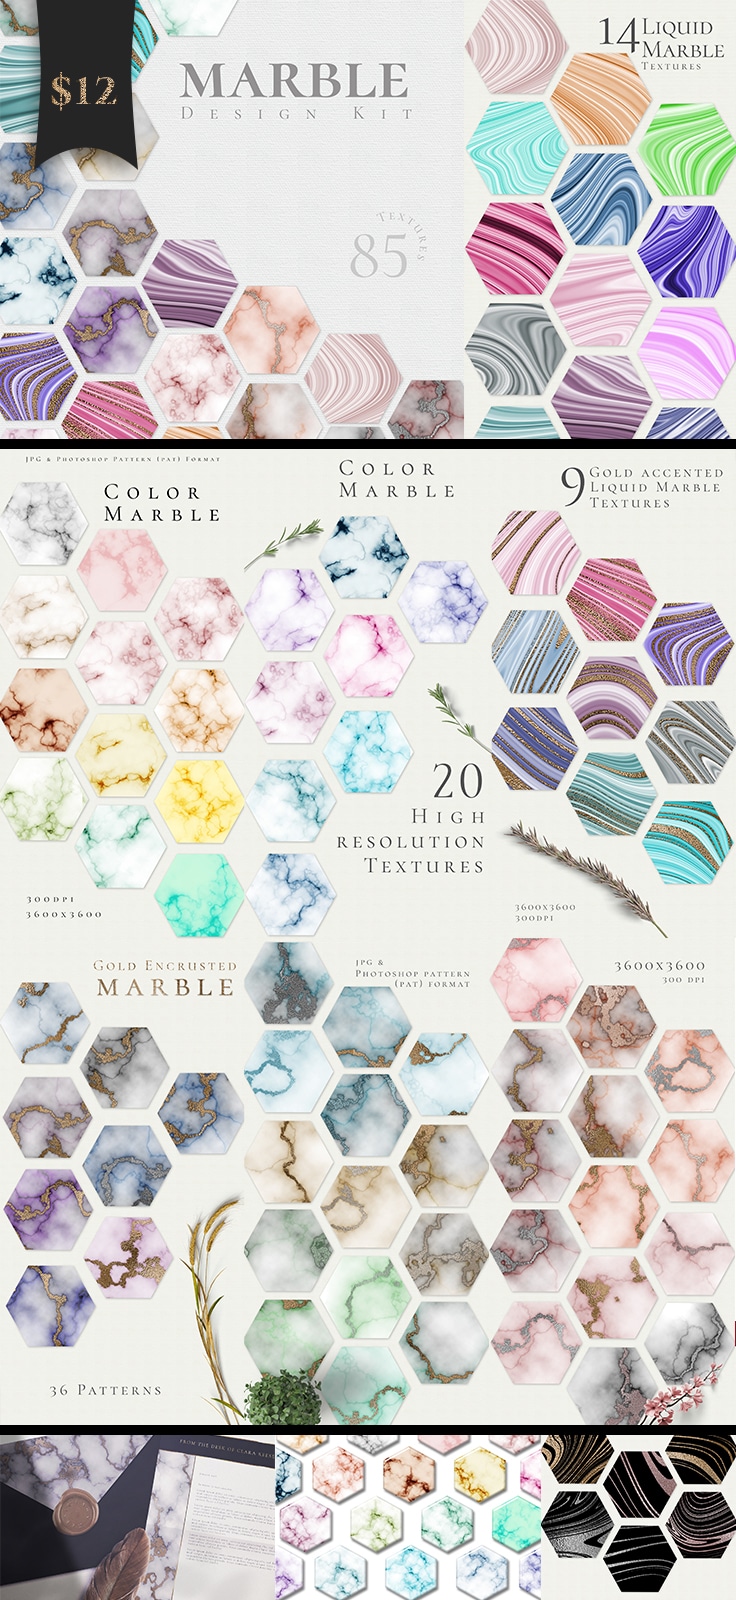 Marble texture kit overview 